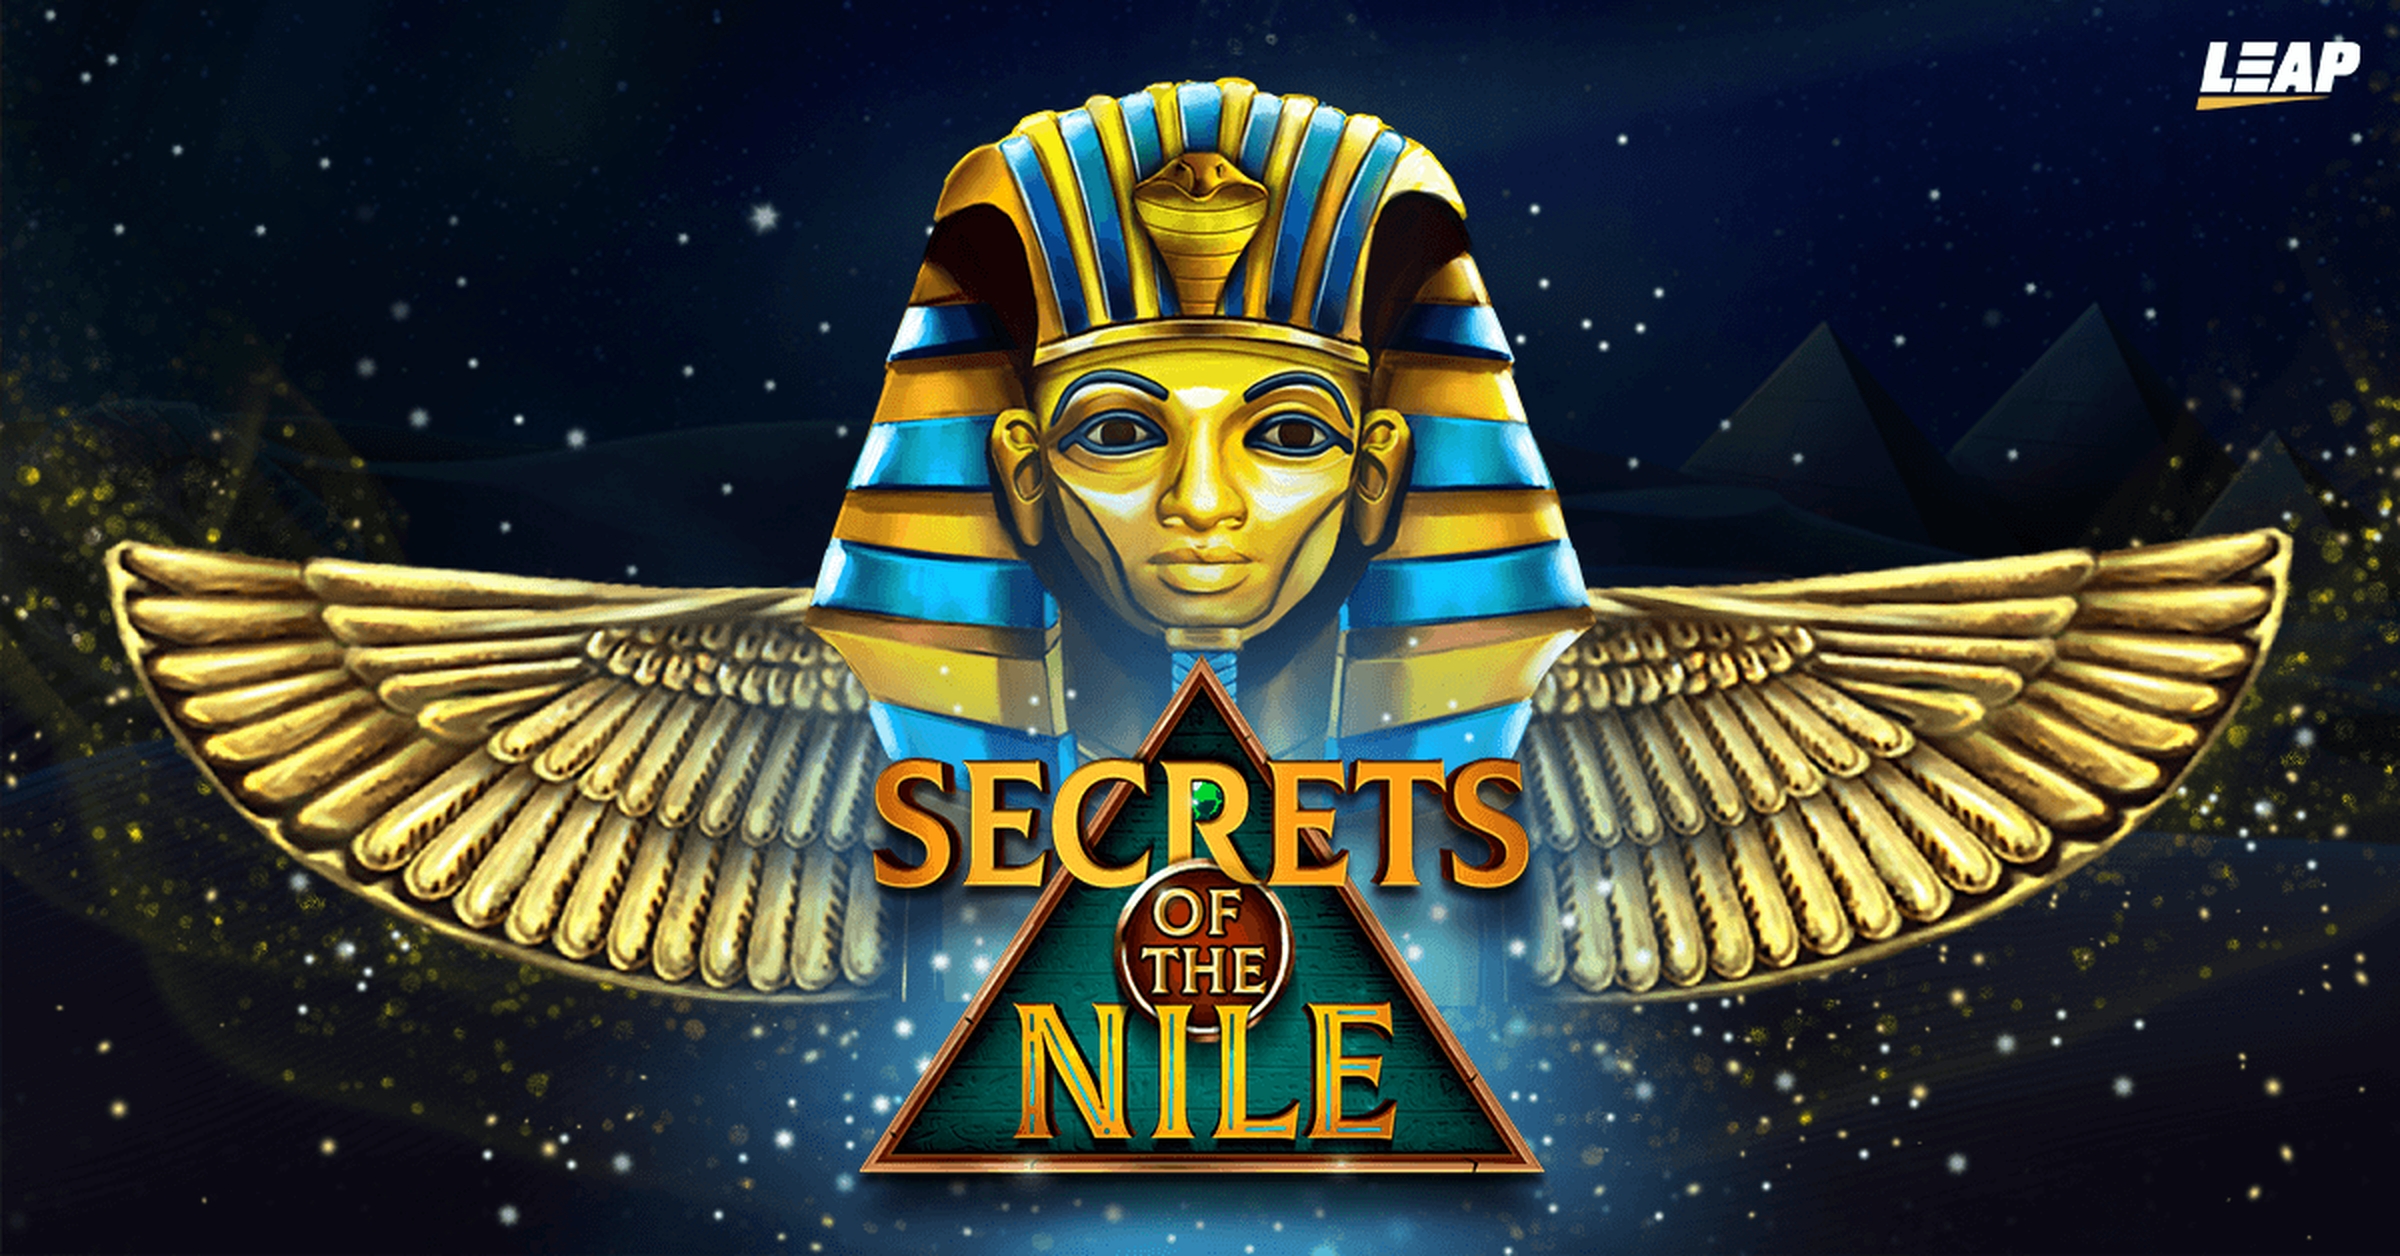 The Secrets of the Nile Online Slot Demo Game by Leap